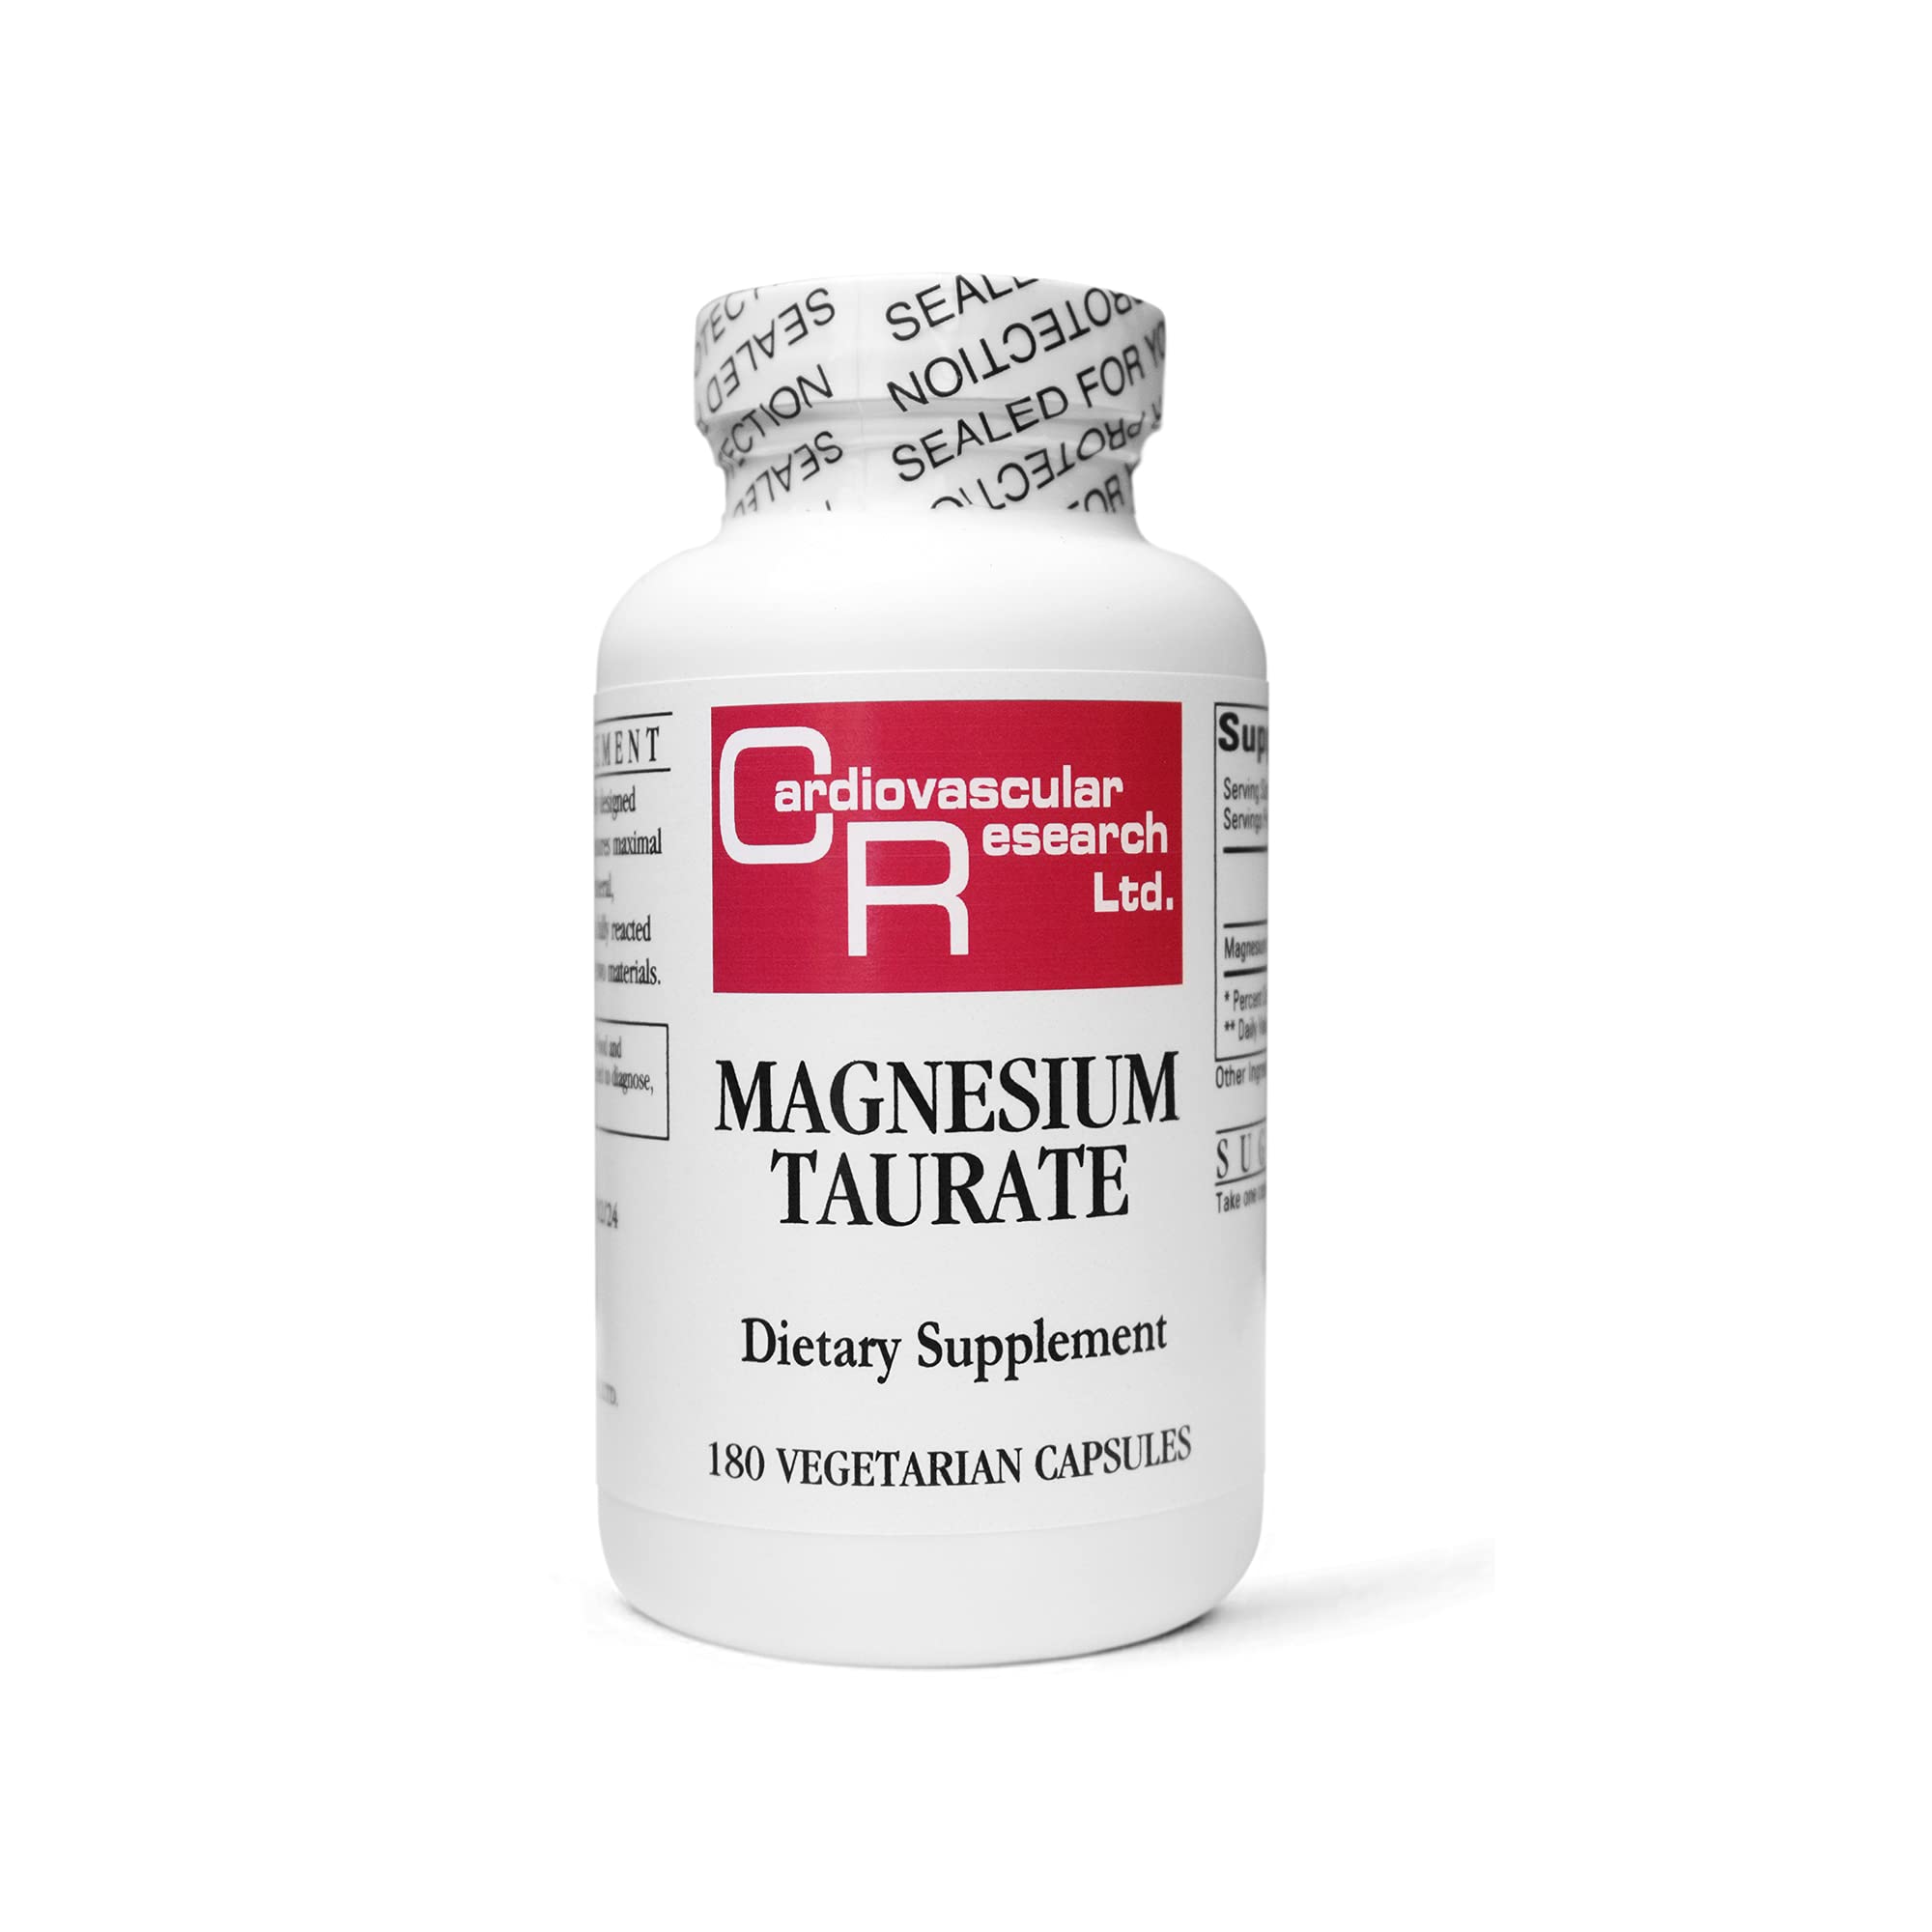 Book Cover Cardiovascular Research Magnesium Taurate 125 mg, Creamy White, 180 Capsules (MAGT2) 180 Count (Pack of 1)